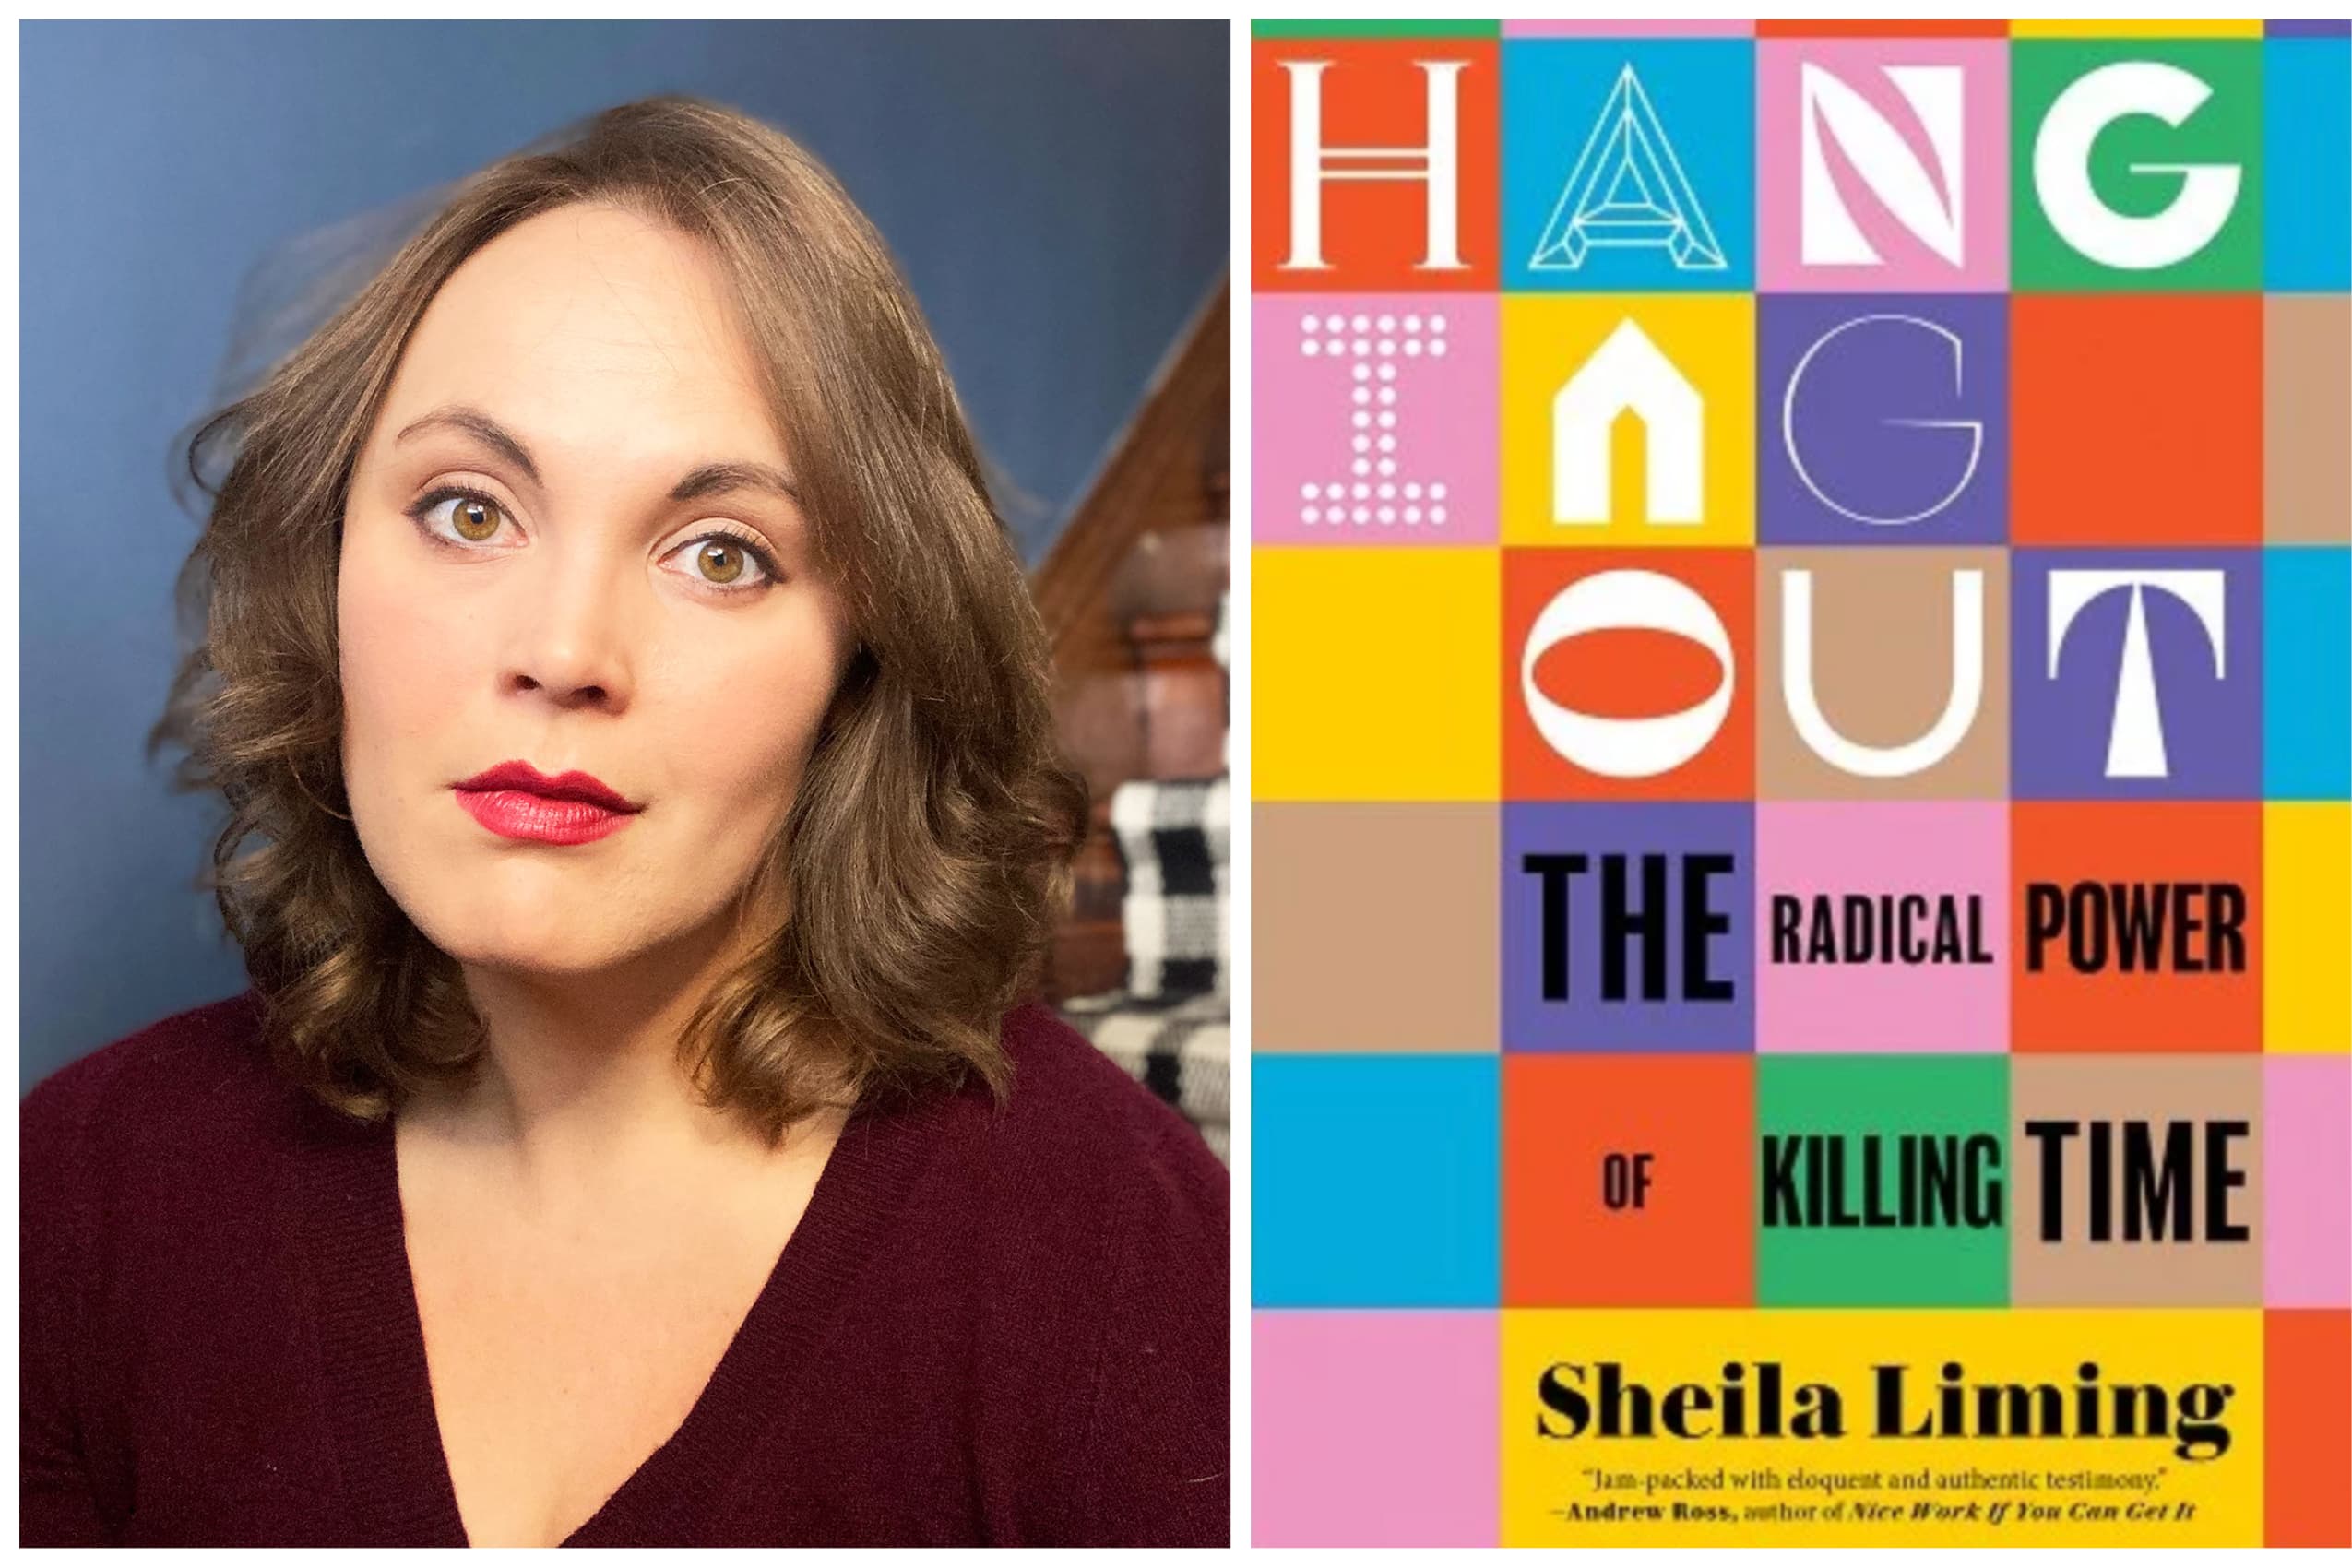 Sheila Liming's new book, &quot;Hanging Out: The Radical Power of Killing Time,&quot; makes the case for casual social gatherings. (Courtesy Sheila Liming/Melville House Books)